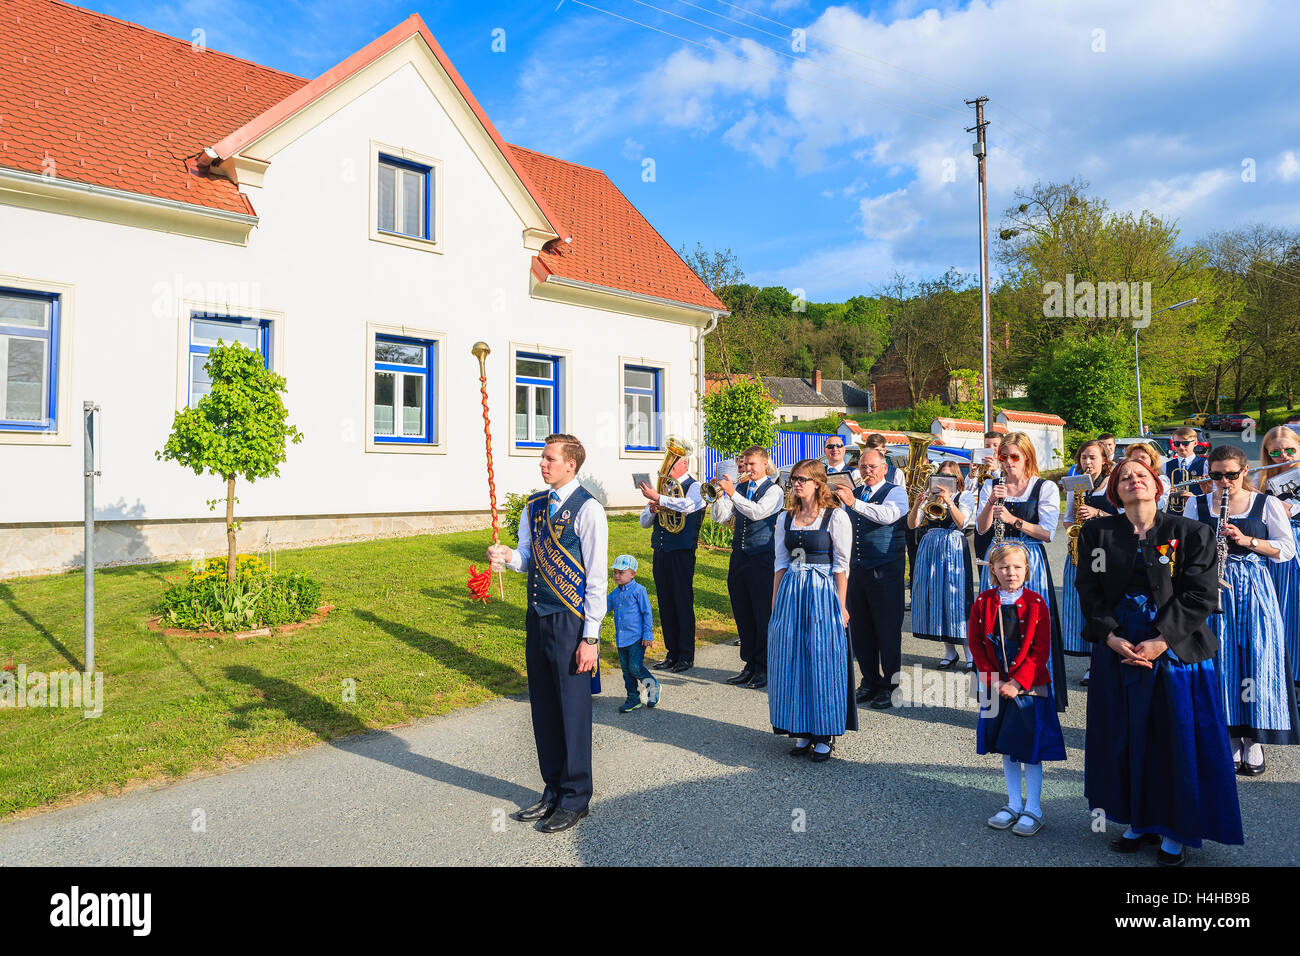 GLASING VILLAGE, AUSTRIA - APR 30, 2016: band playing music on village street during May Tree celebration. In Germany and Austri Stock Photo